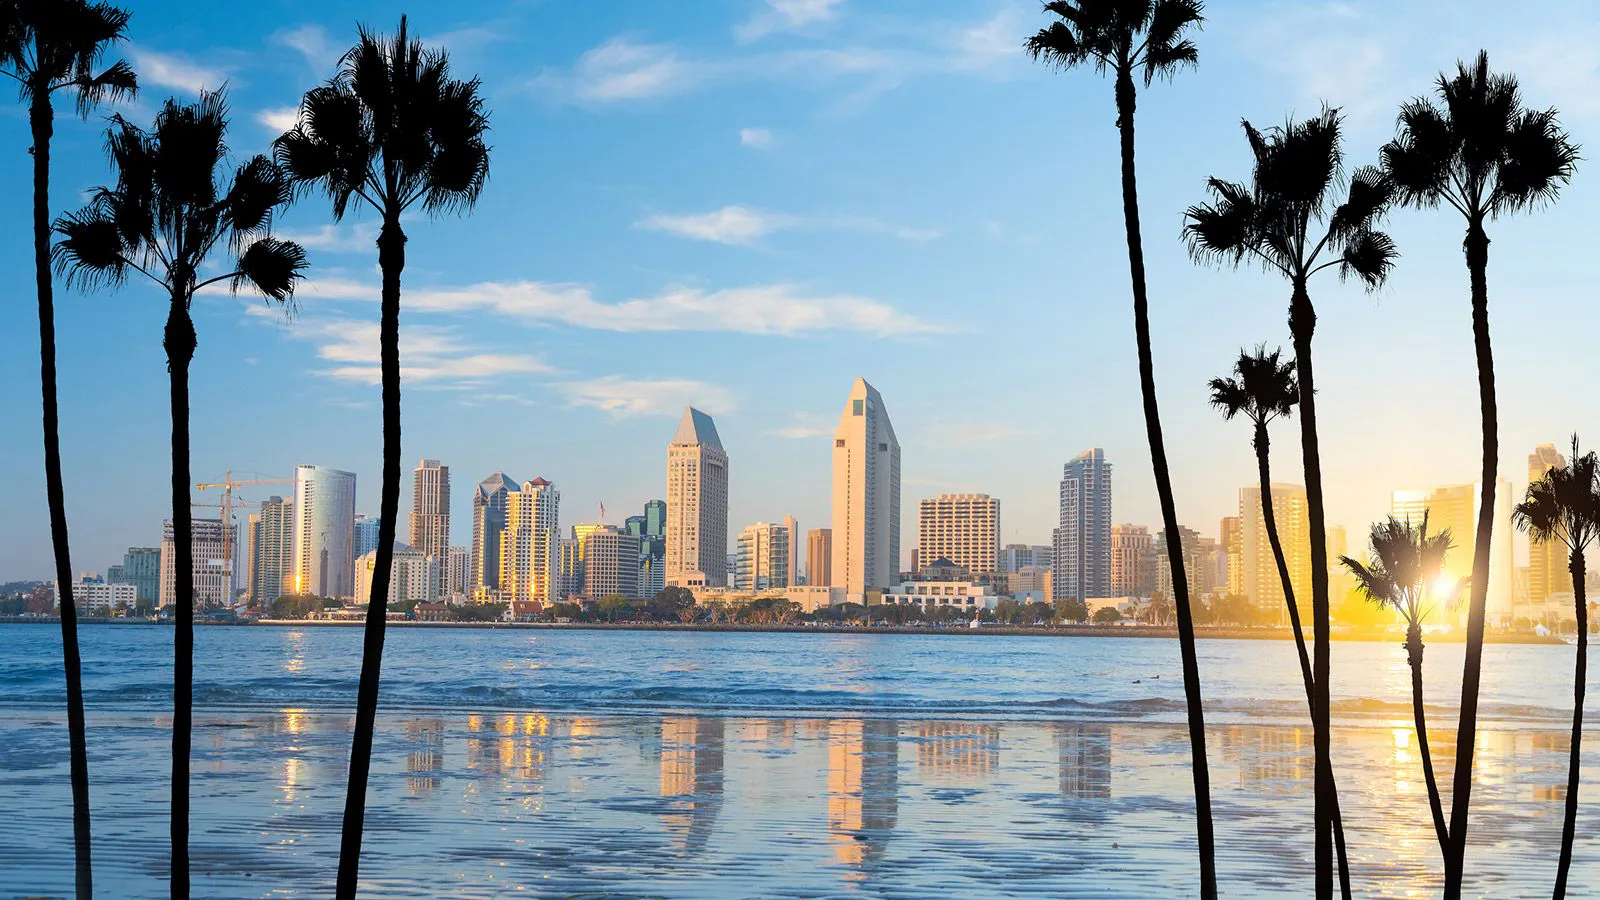 The skyline of San Diego in California with thin palm trees in front